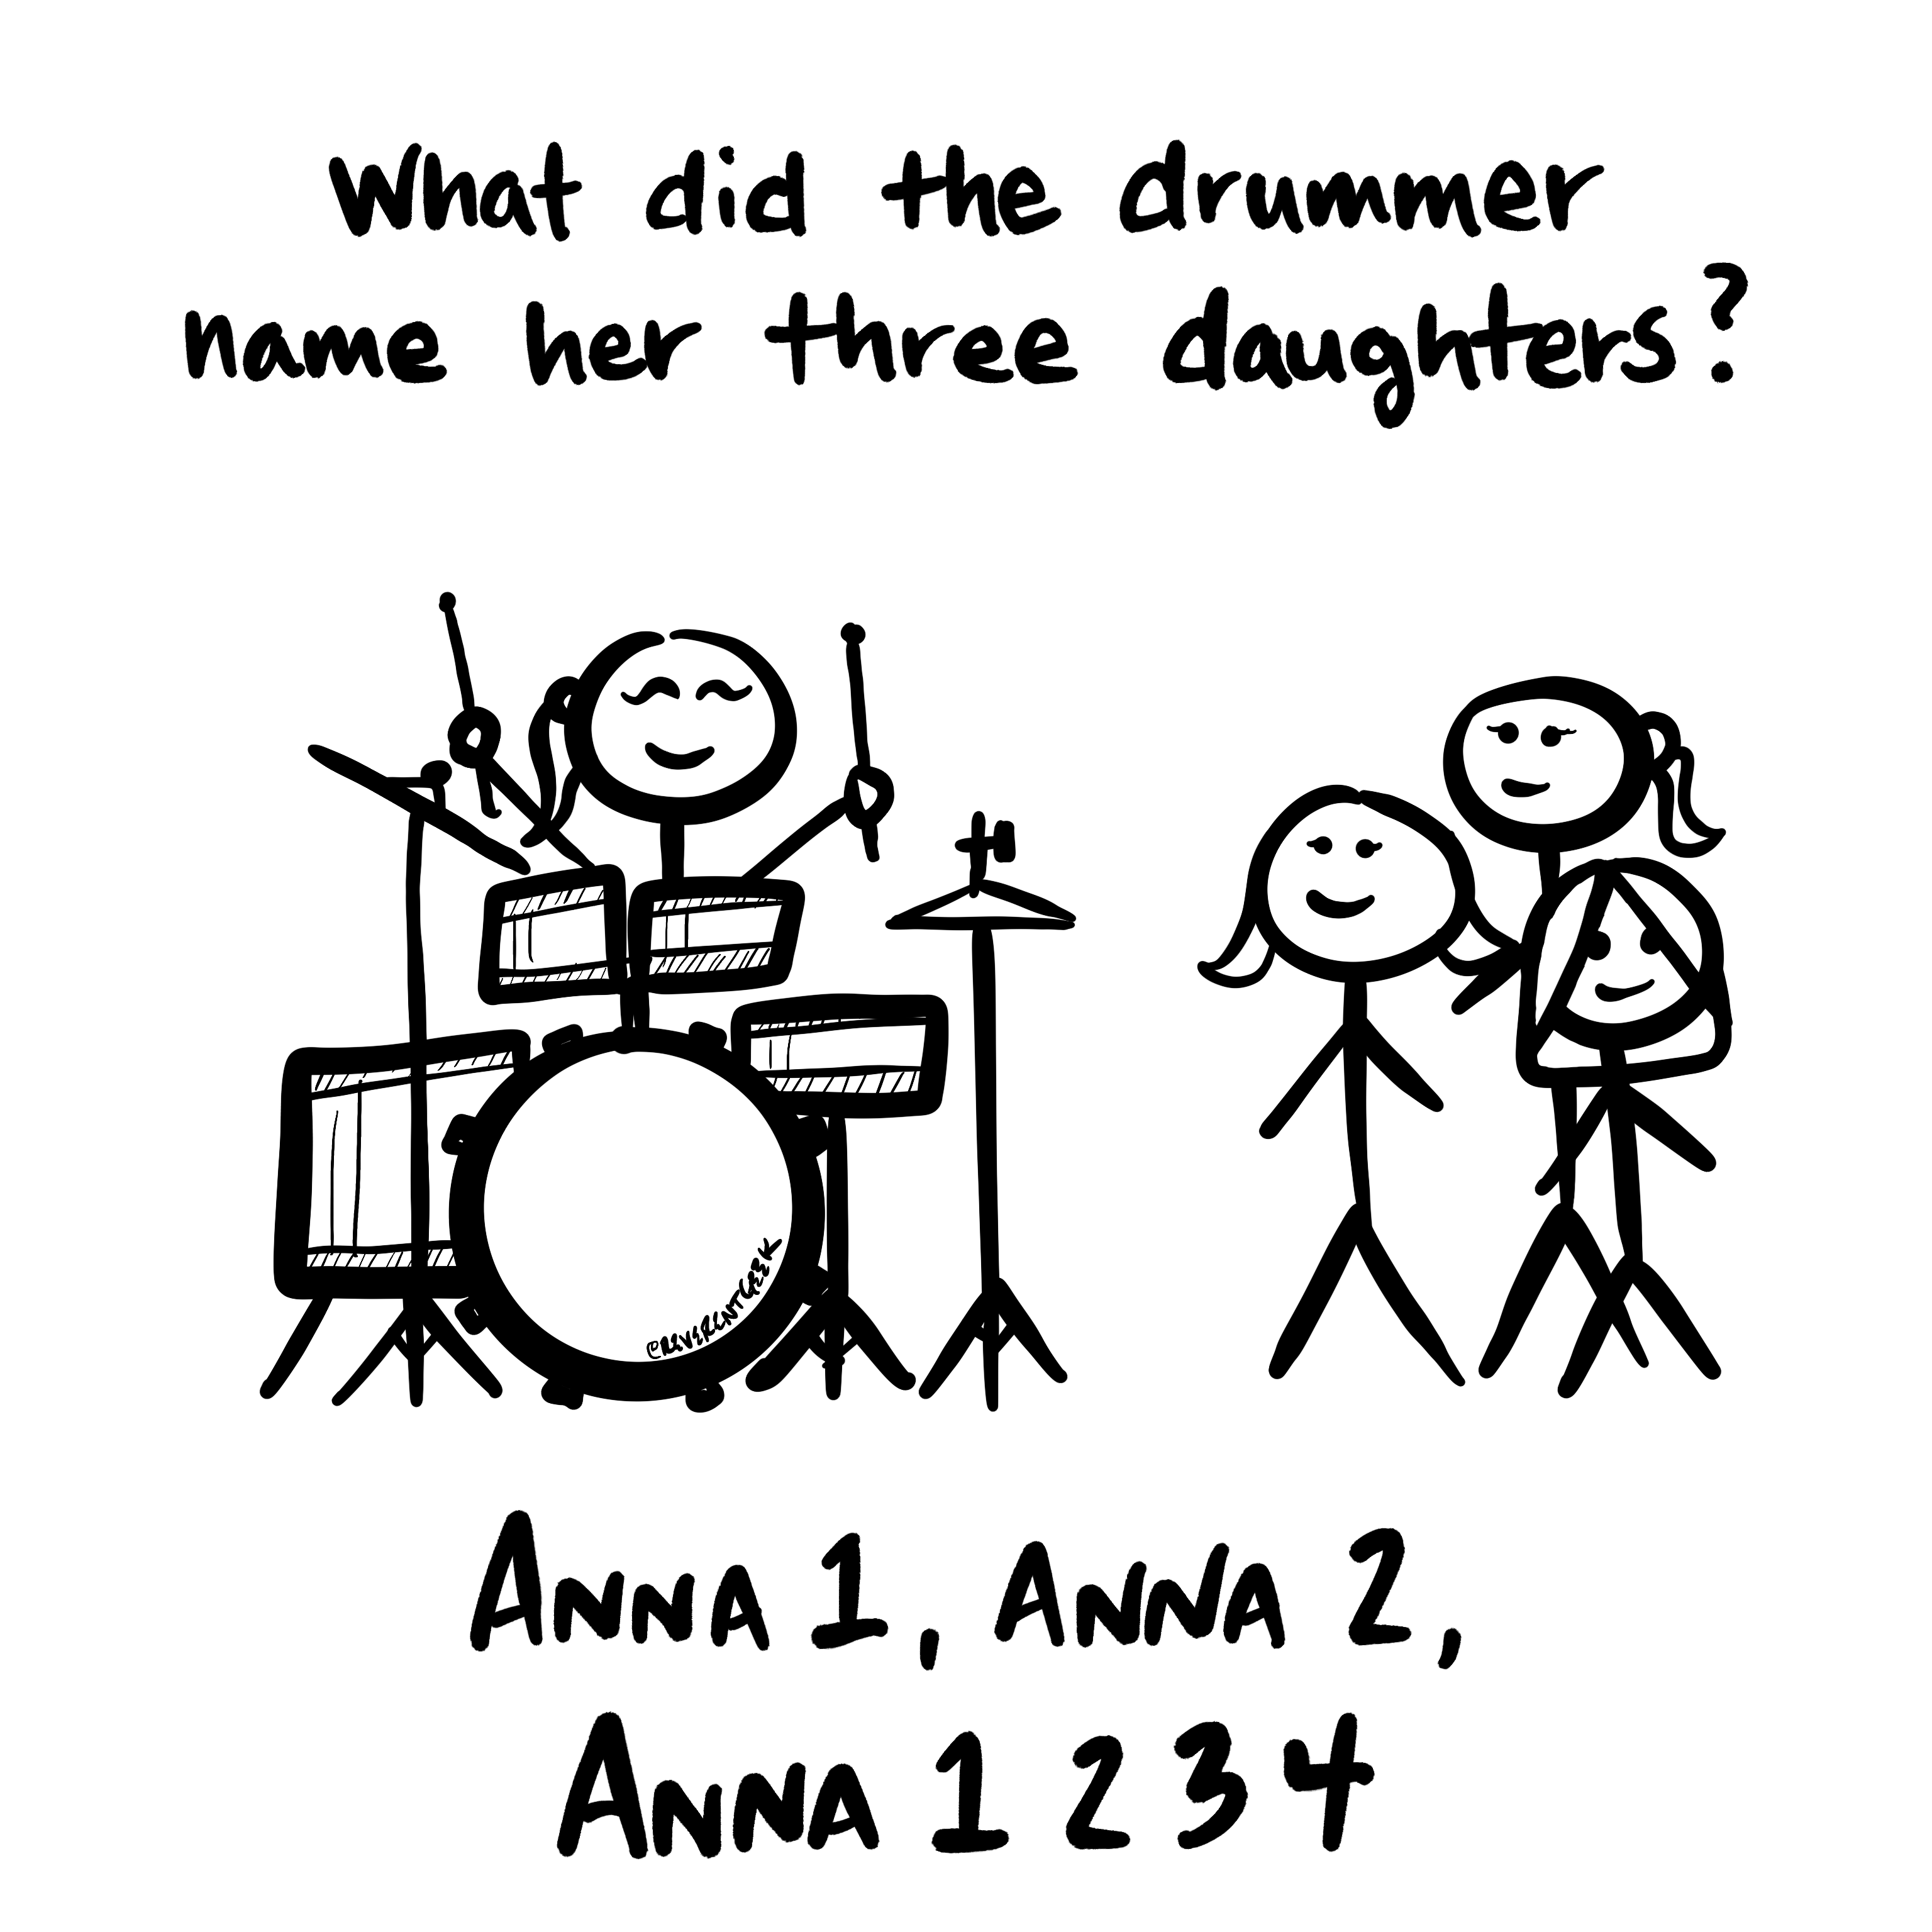 What did the drummer name her three daughters?